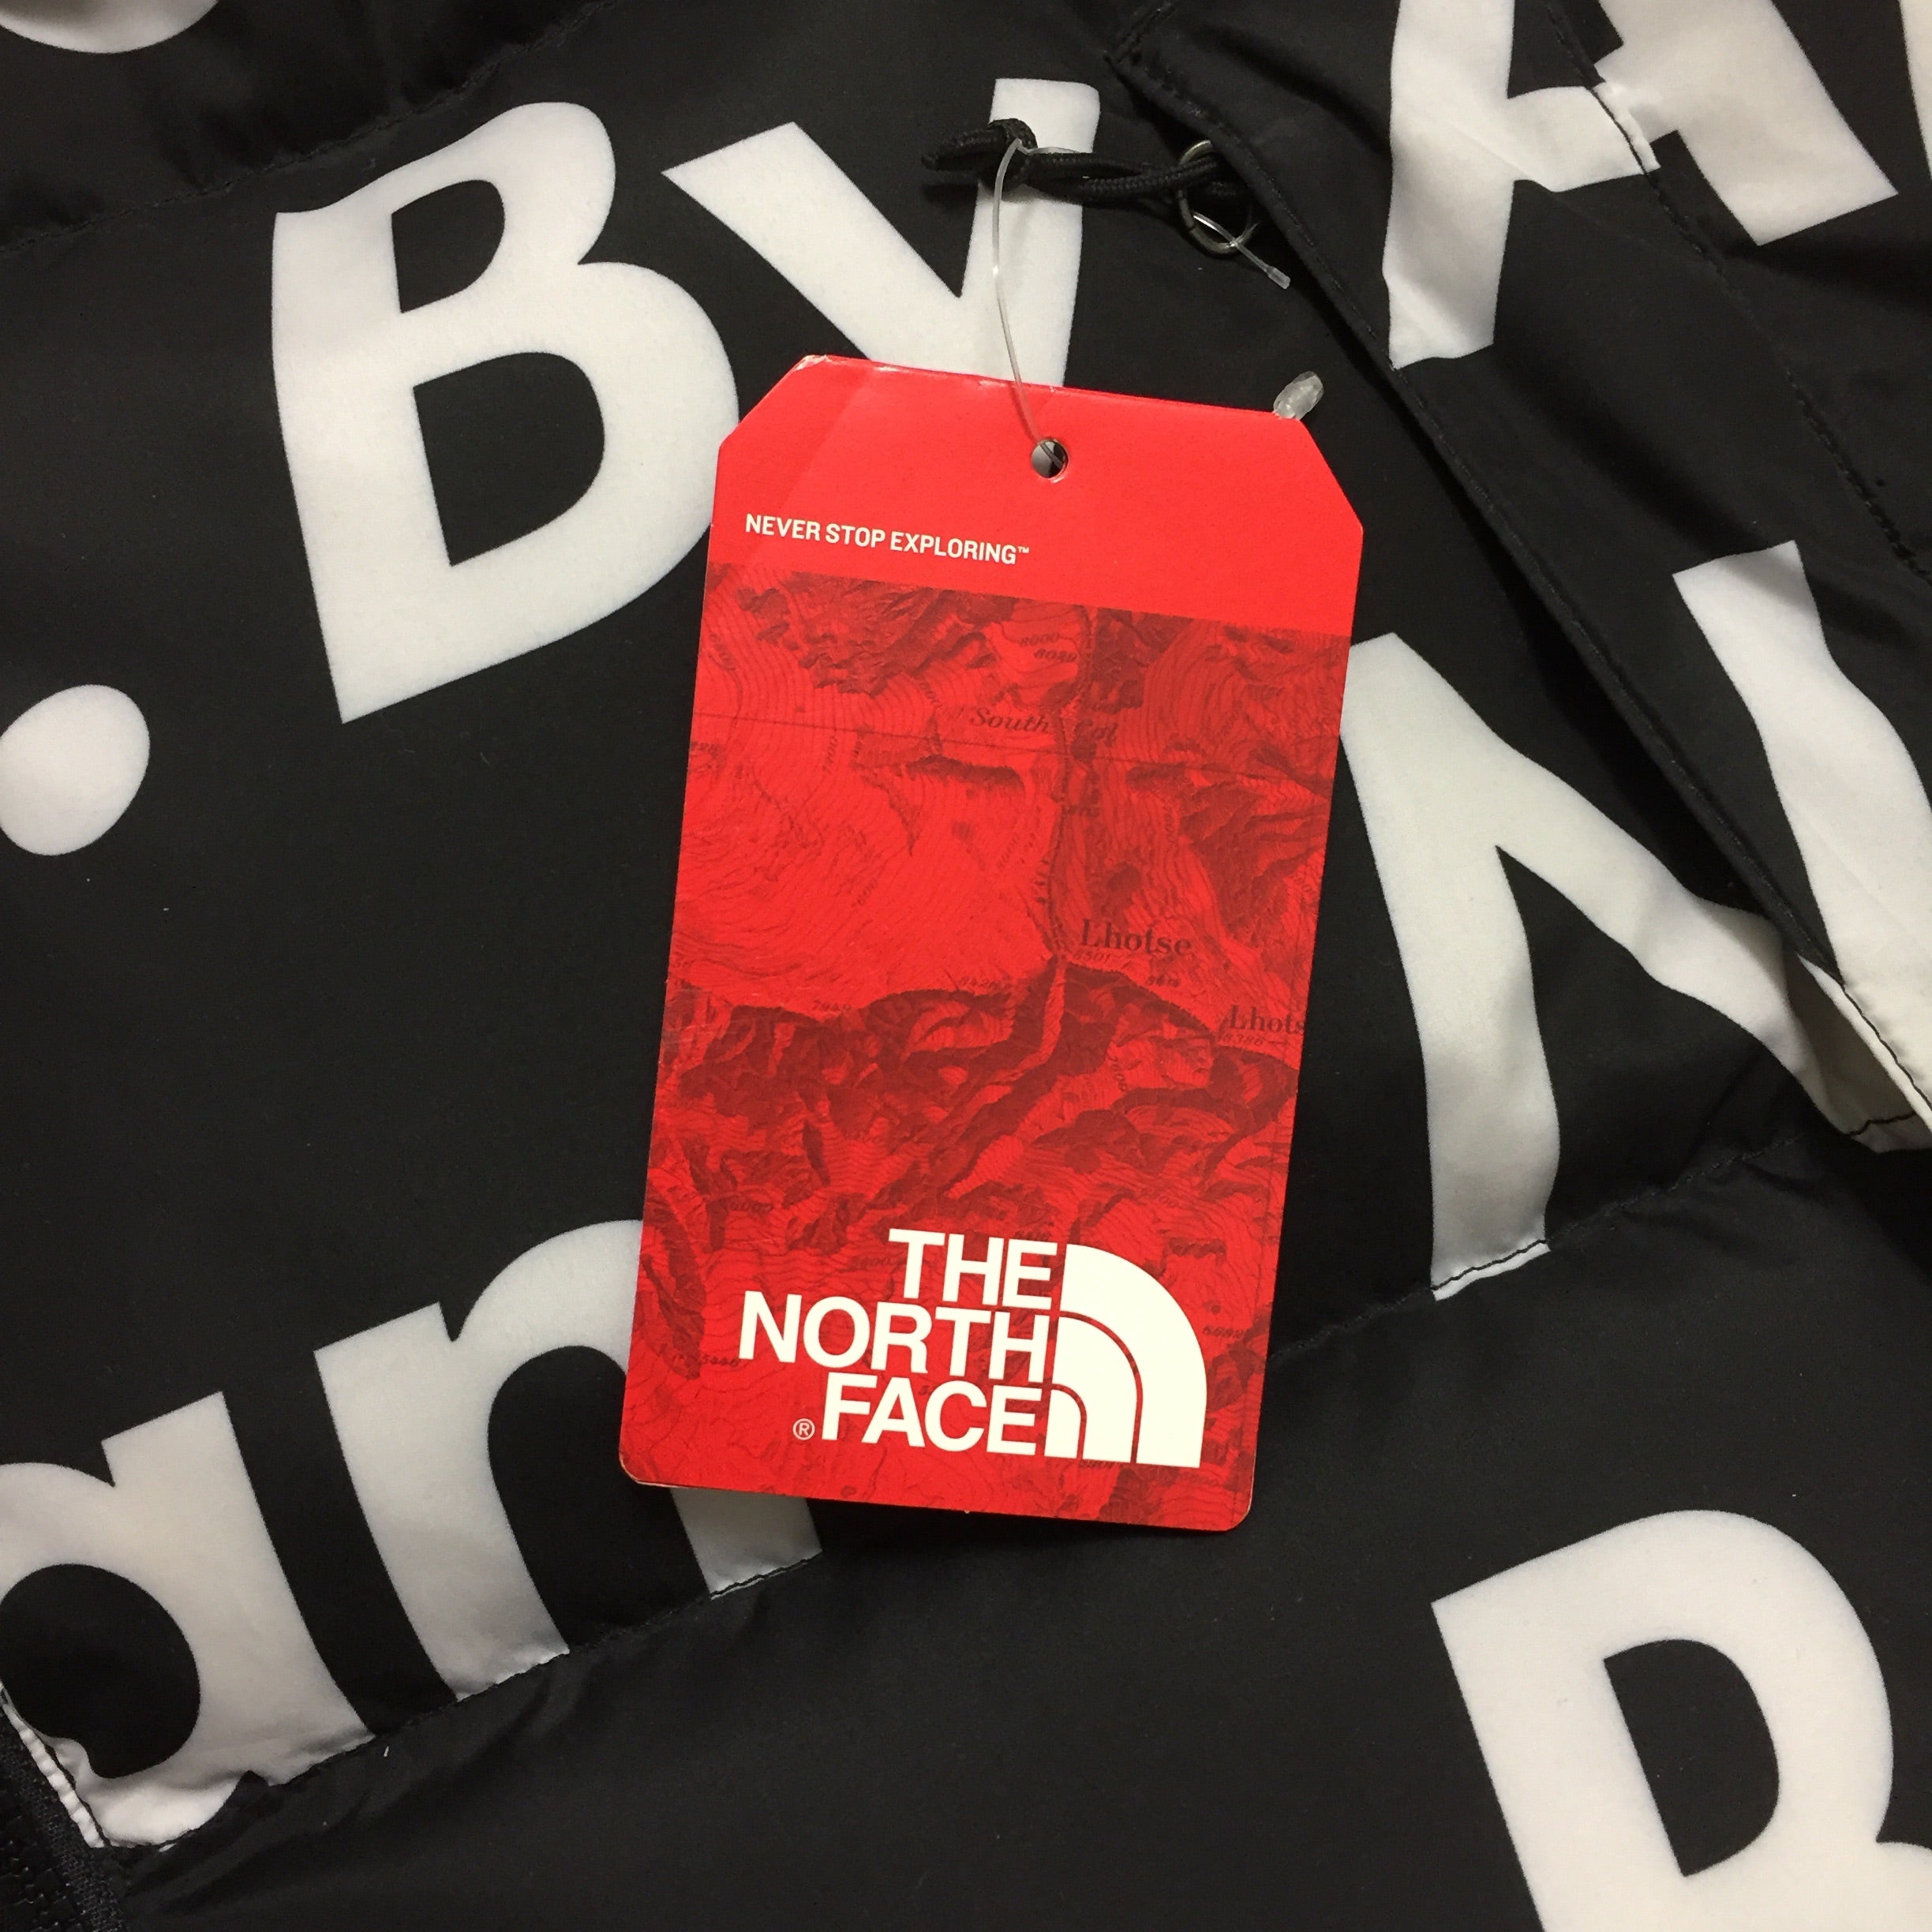 2015 Supreme x The North Face By Any Means Necessary Black Nuptse